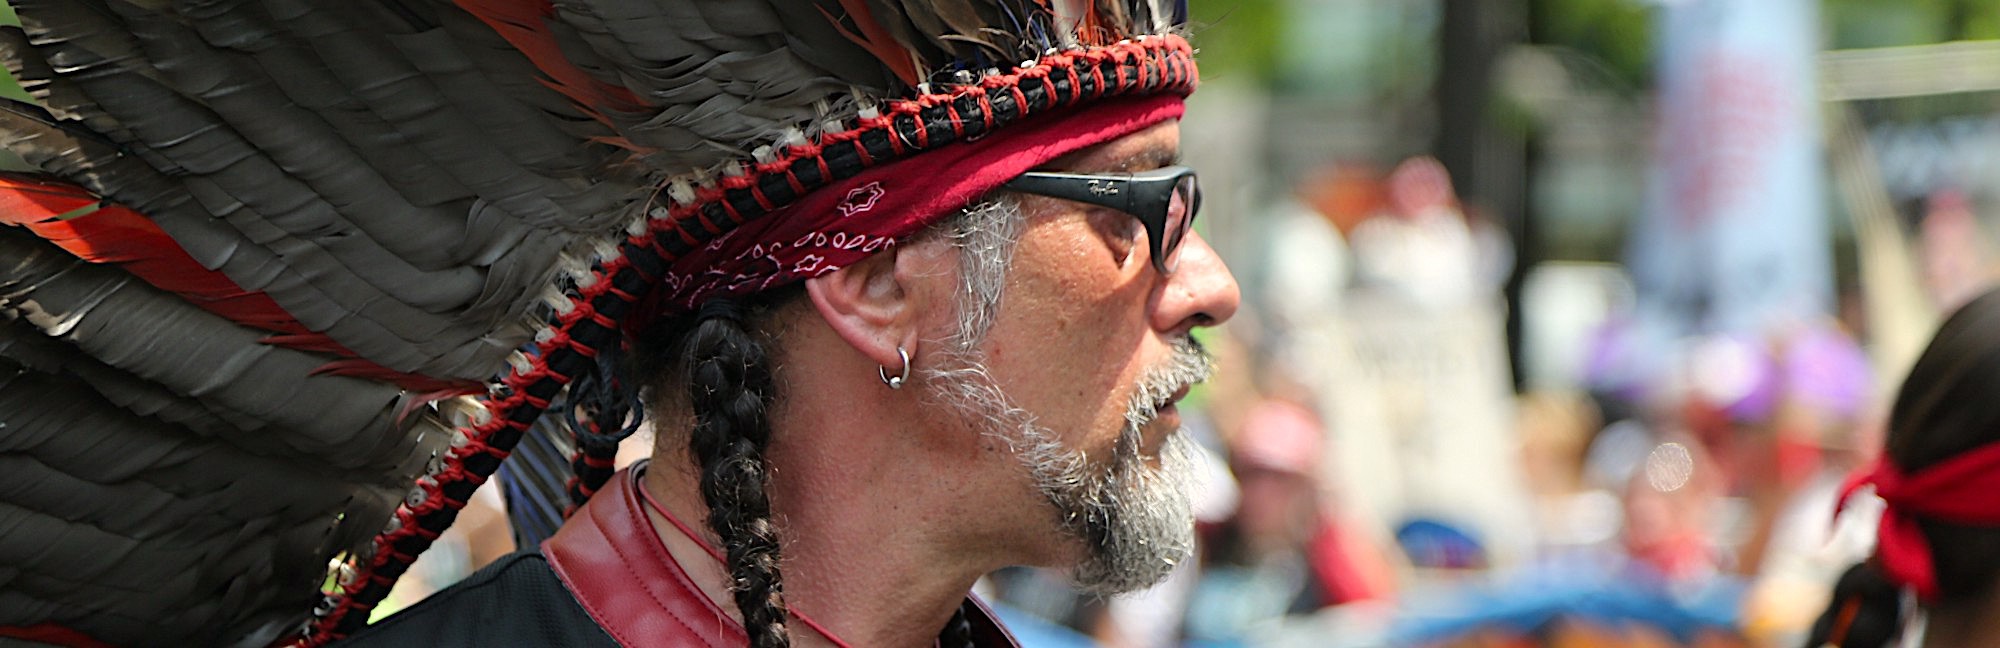 Native amercian protestor with headdress and glasses